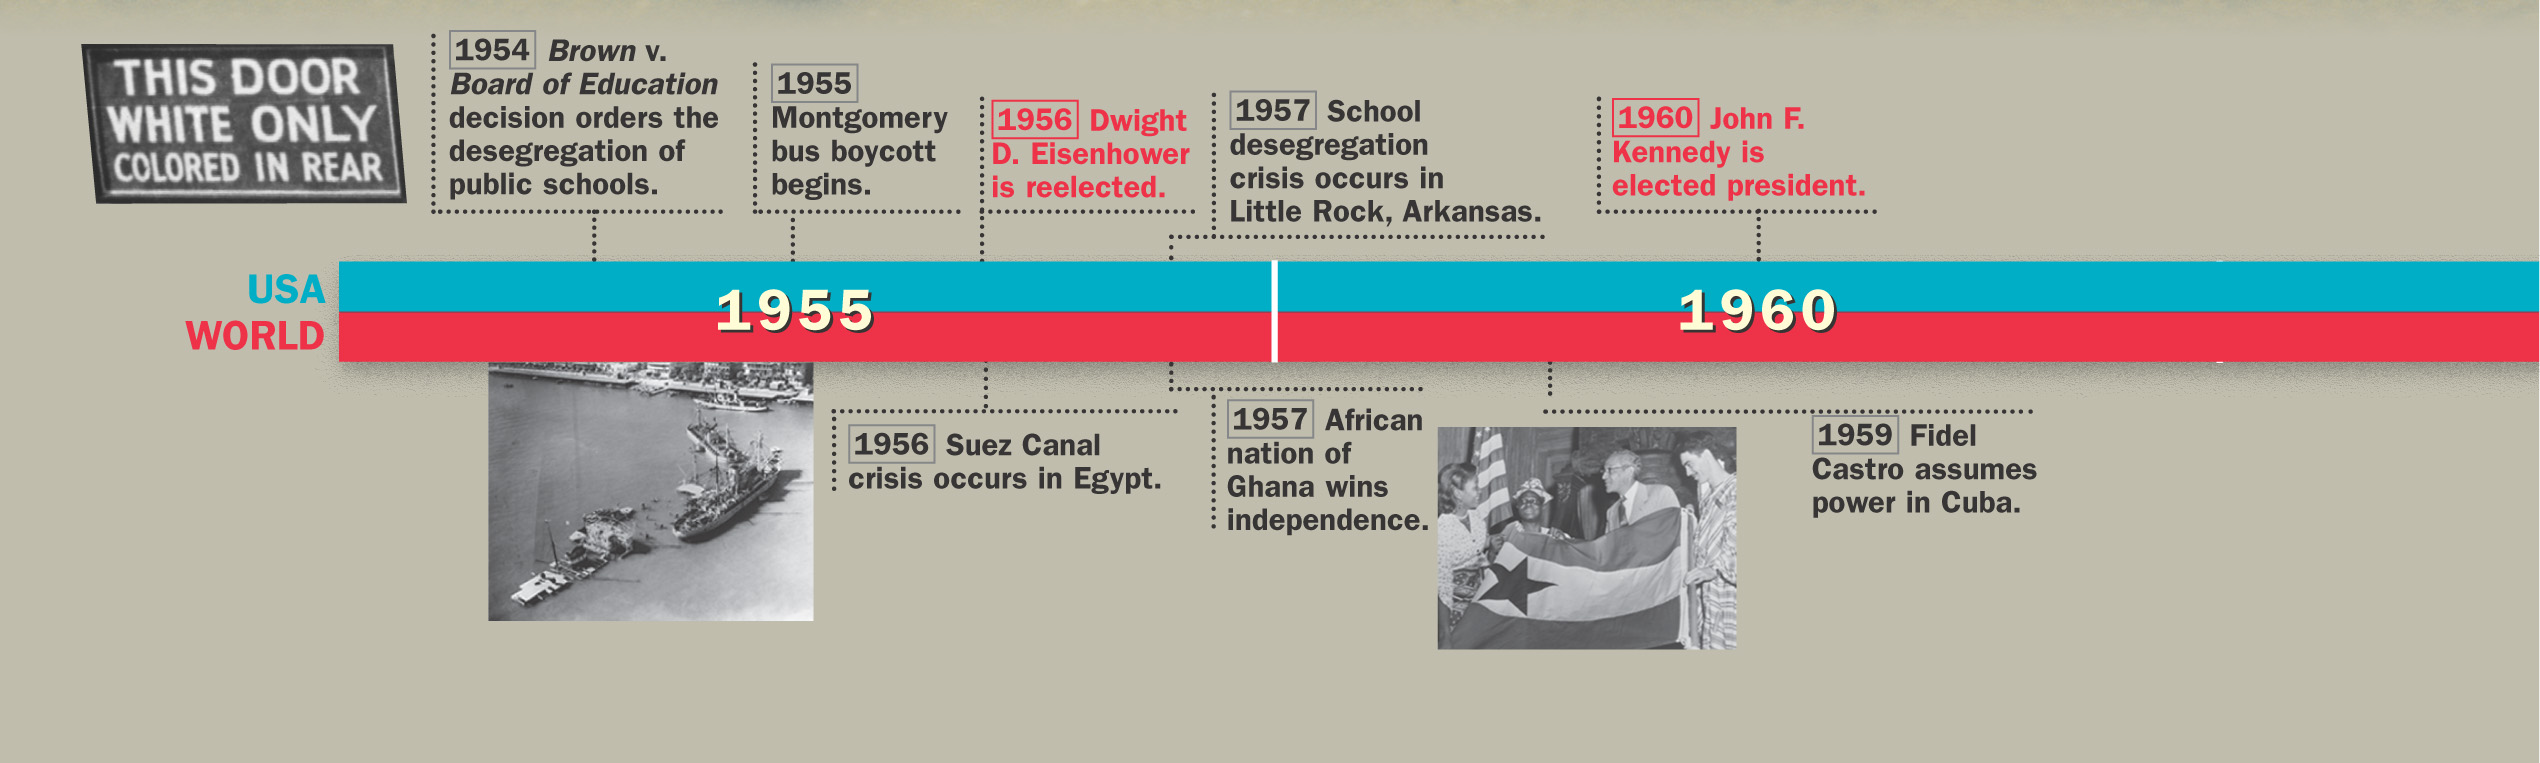 A timeline of historical events from 1954 to 1970 in both the U.S. and the world